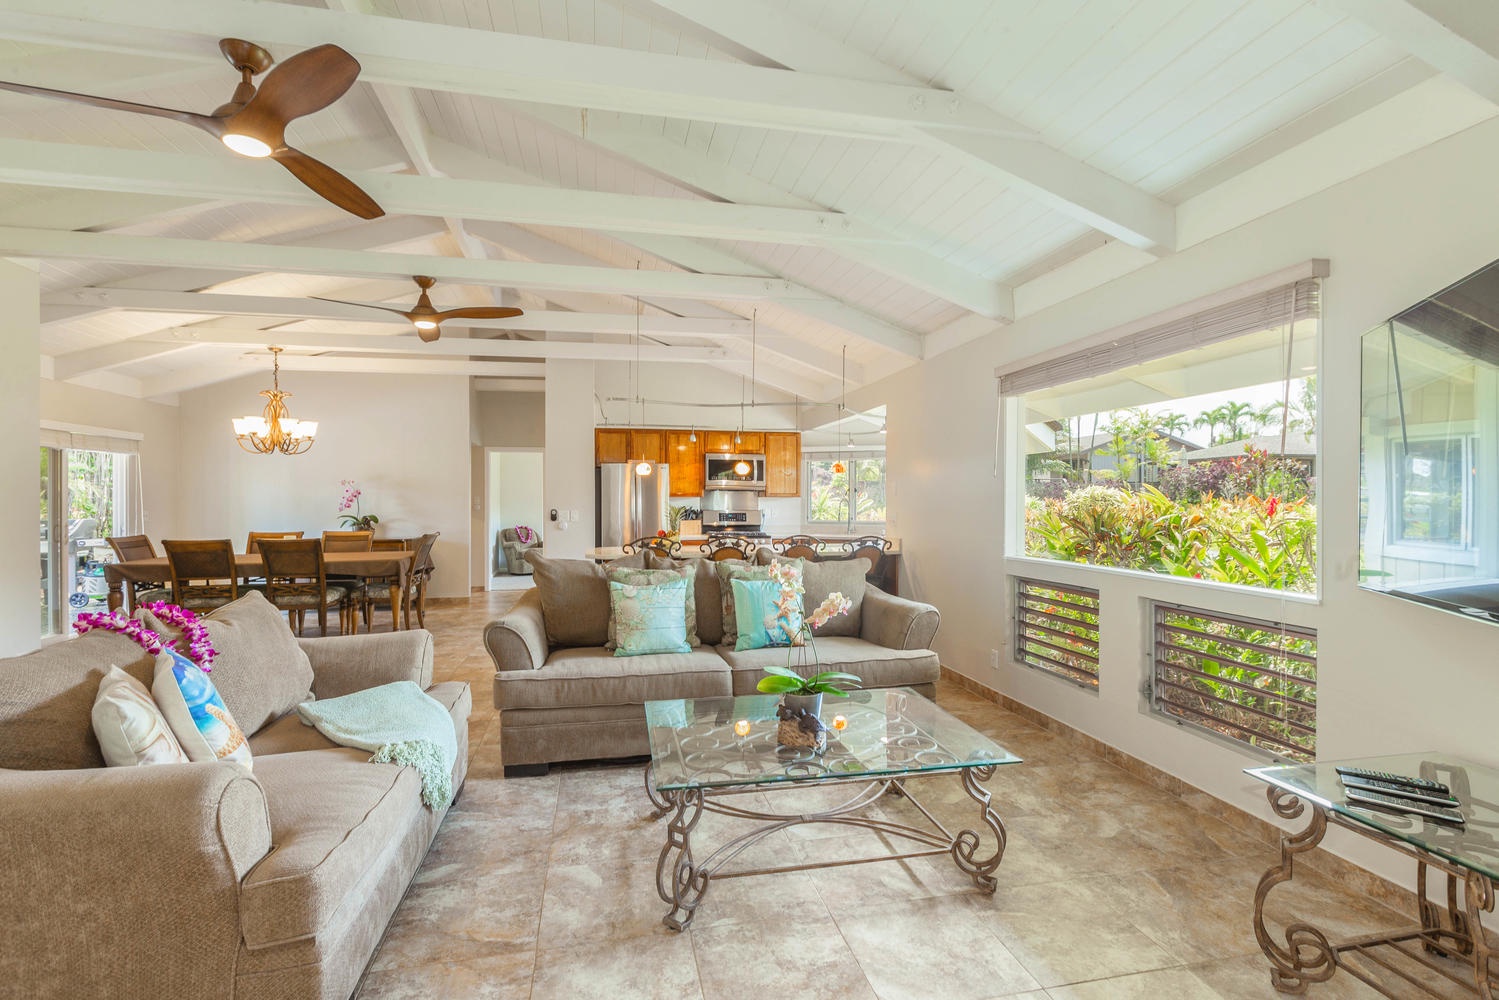 Princeville Vacation Rentals, Mala Hale - The stylishly decorated living room features plush sofas and garden views